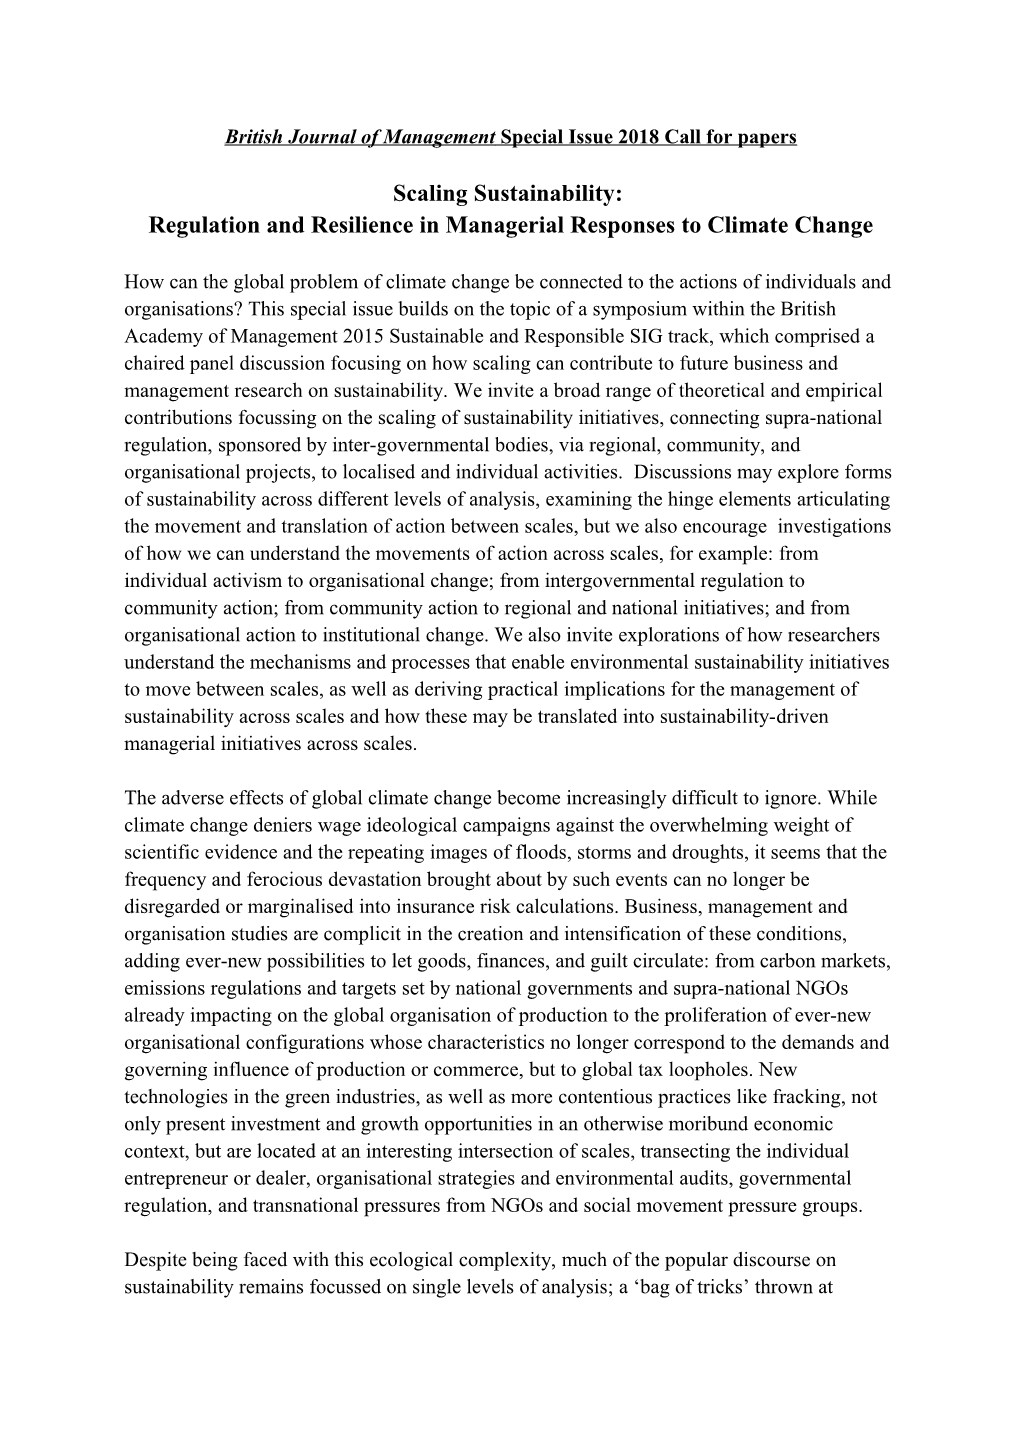 British Journal of Management Special Issue 2018 Call for Papers